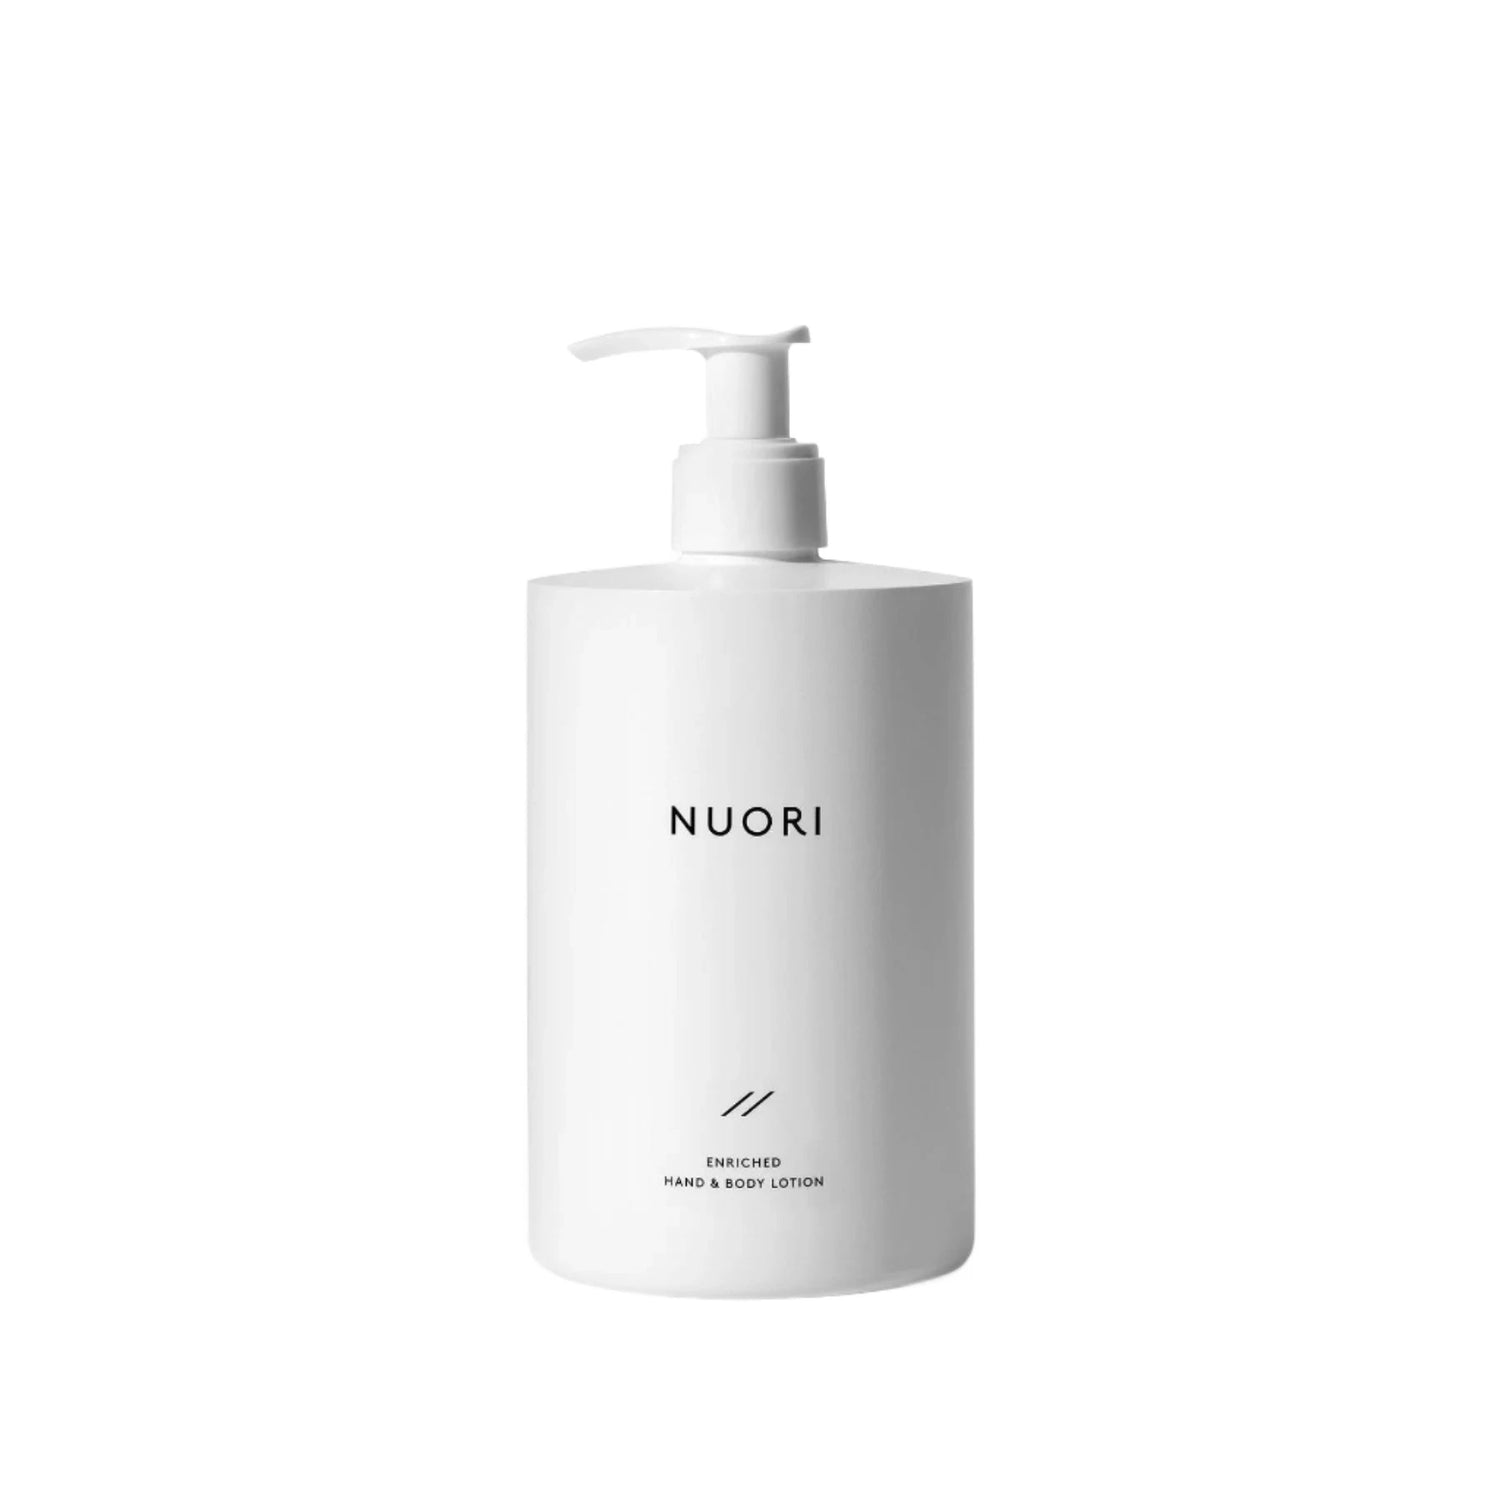 Nuori enriched hand & body lotion.